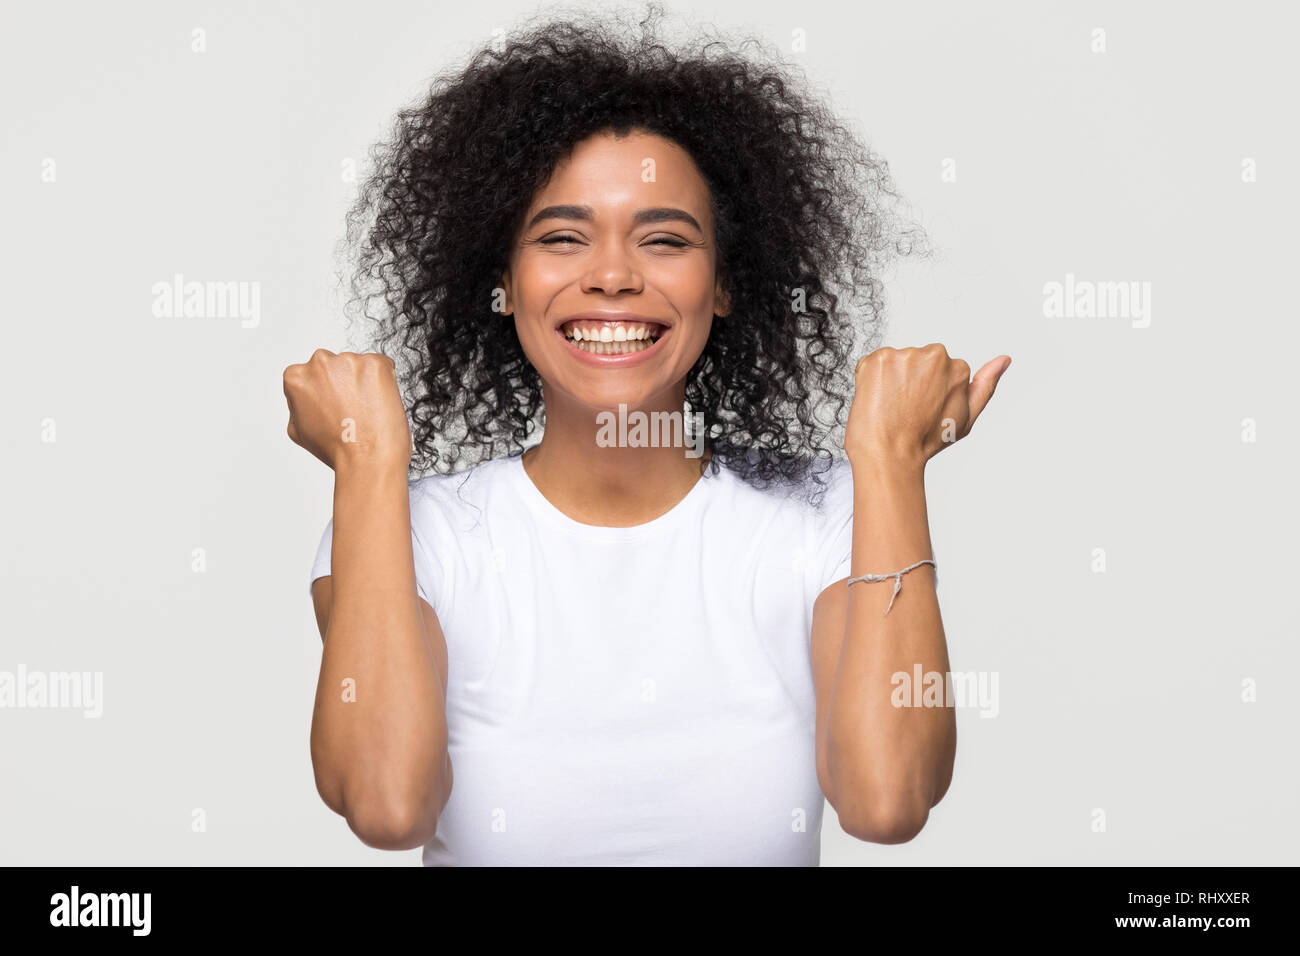 Excited happy african woman feeling overjoyed isolated at white background Stock Photo